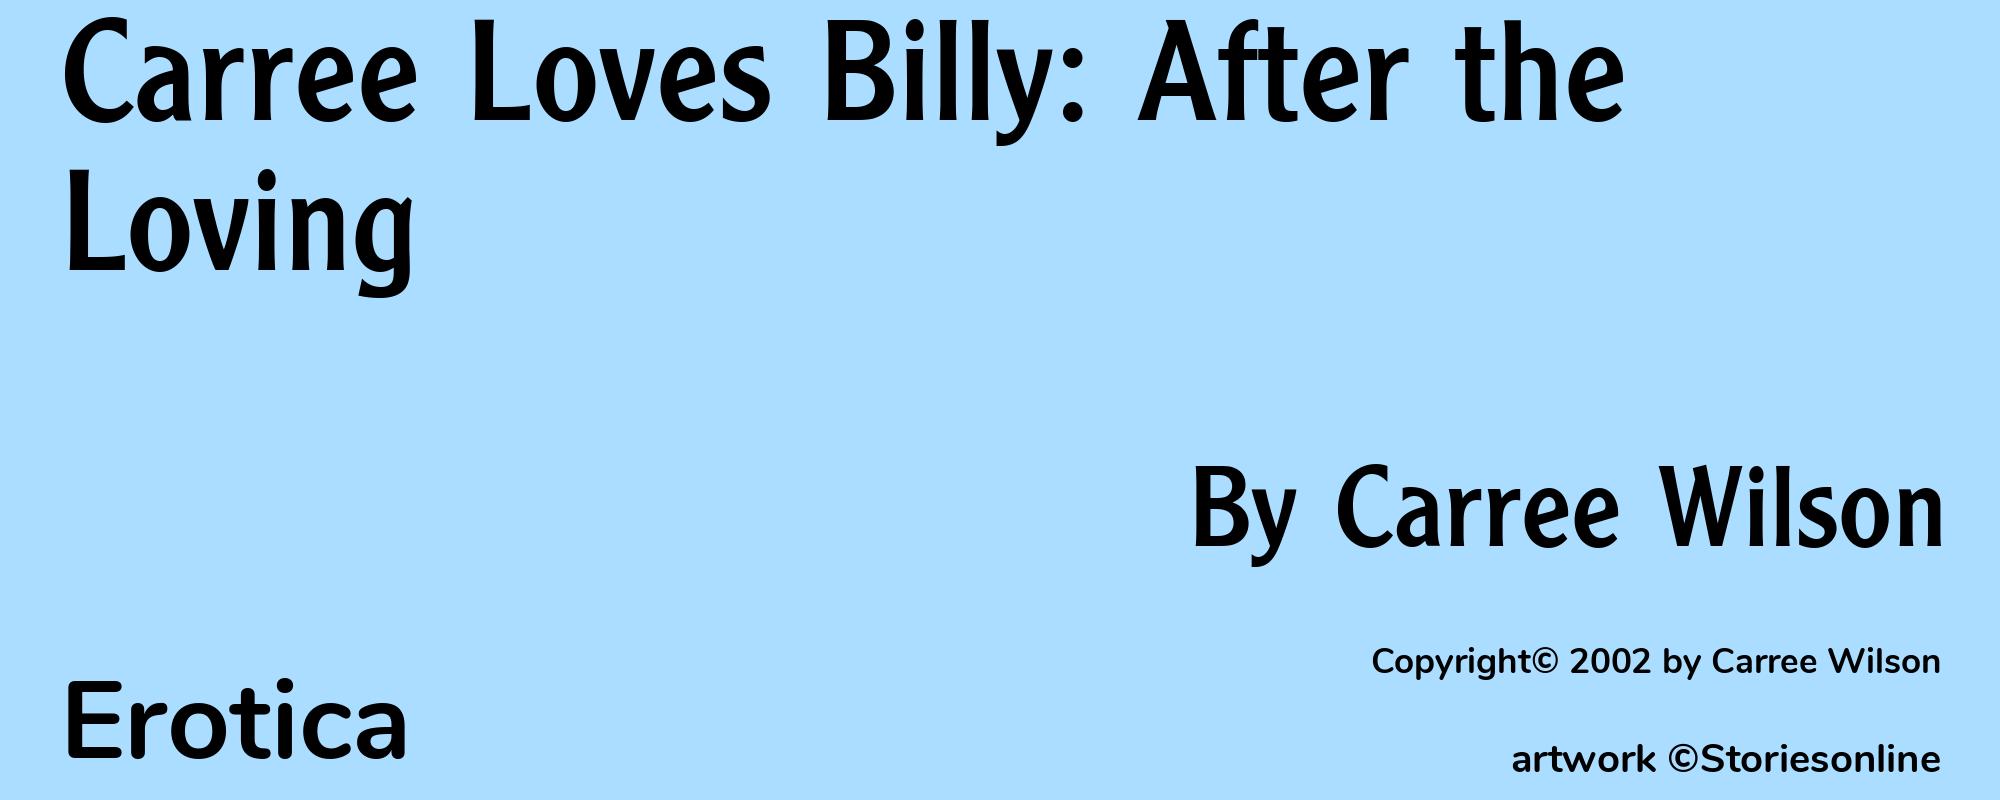 Carree Loves Billy: After the Loving - Cover